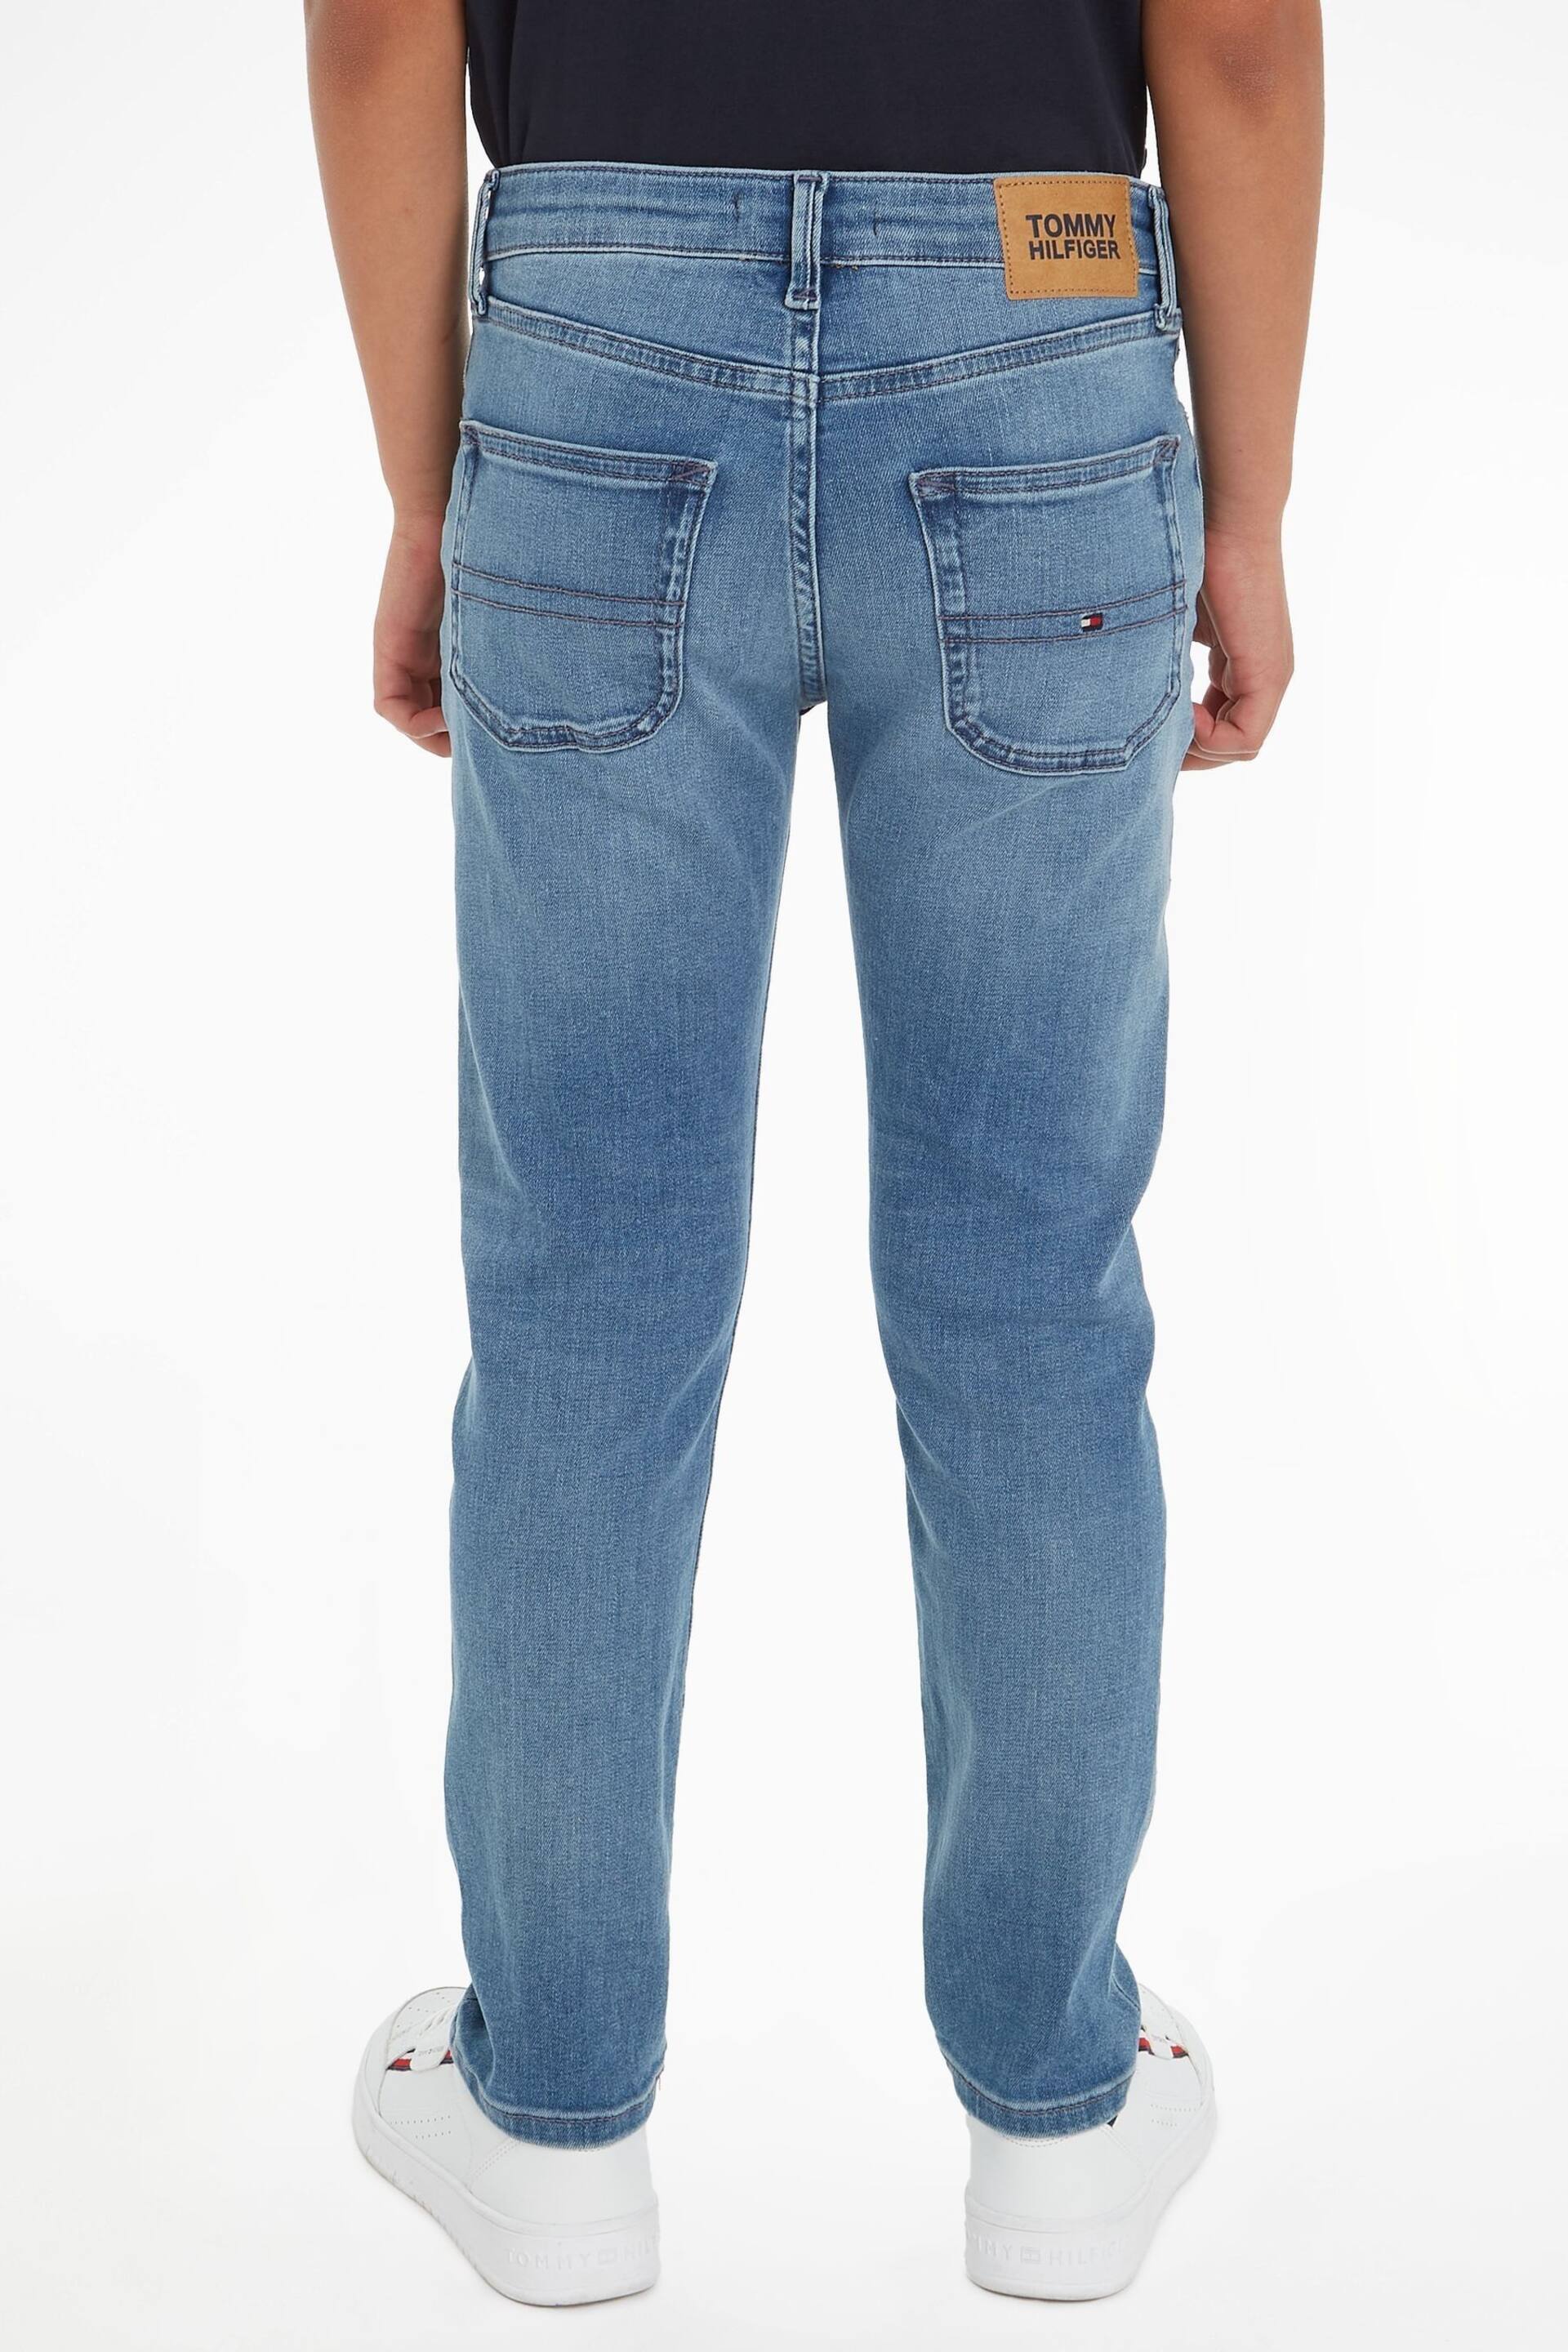 Tommy Hilfiger Blue Modern Straight Jeans - Image 2 of 5